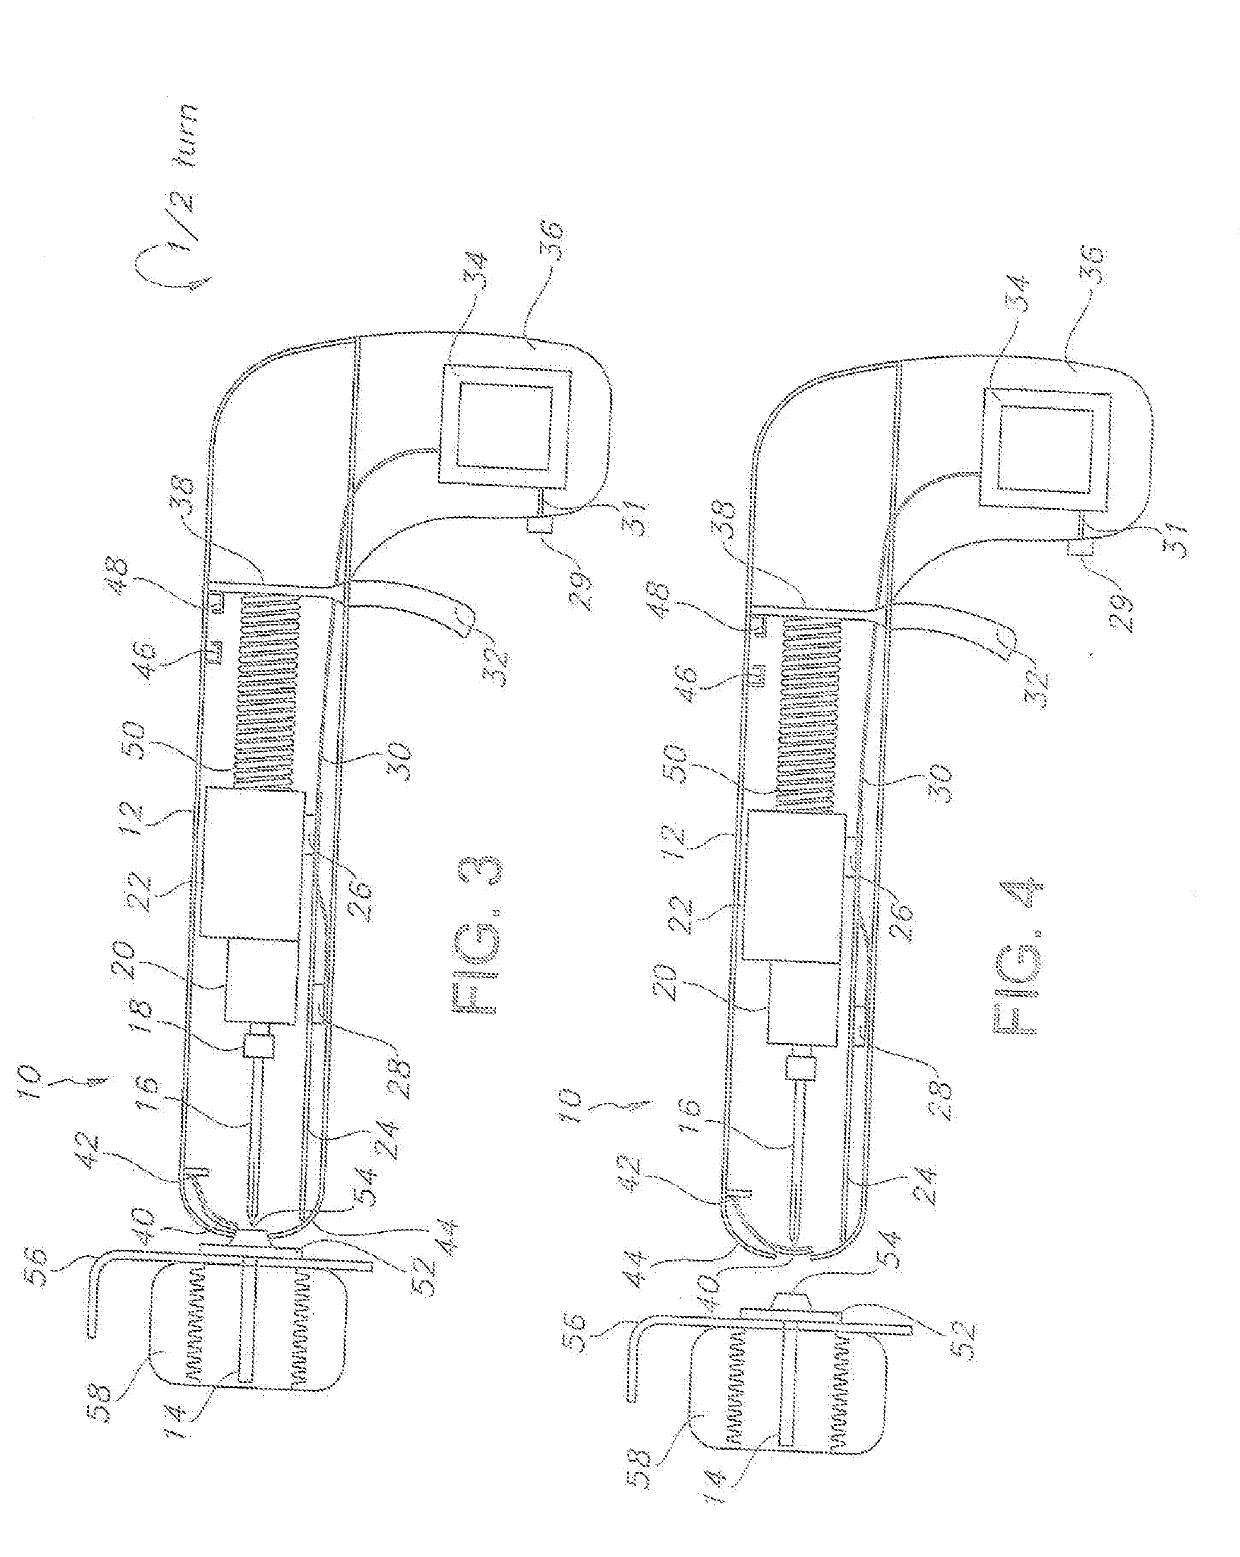 Passive safety intraosseous device